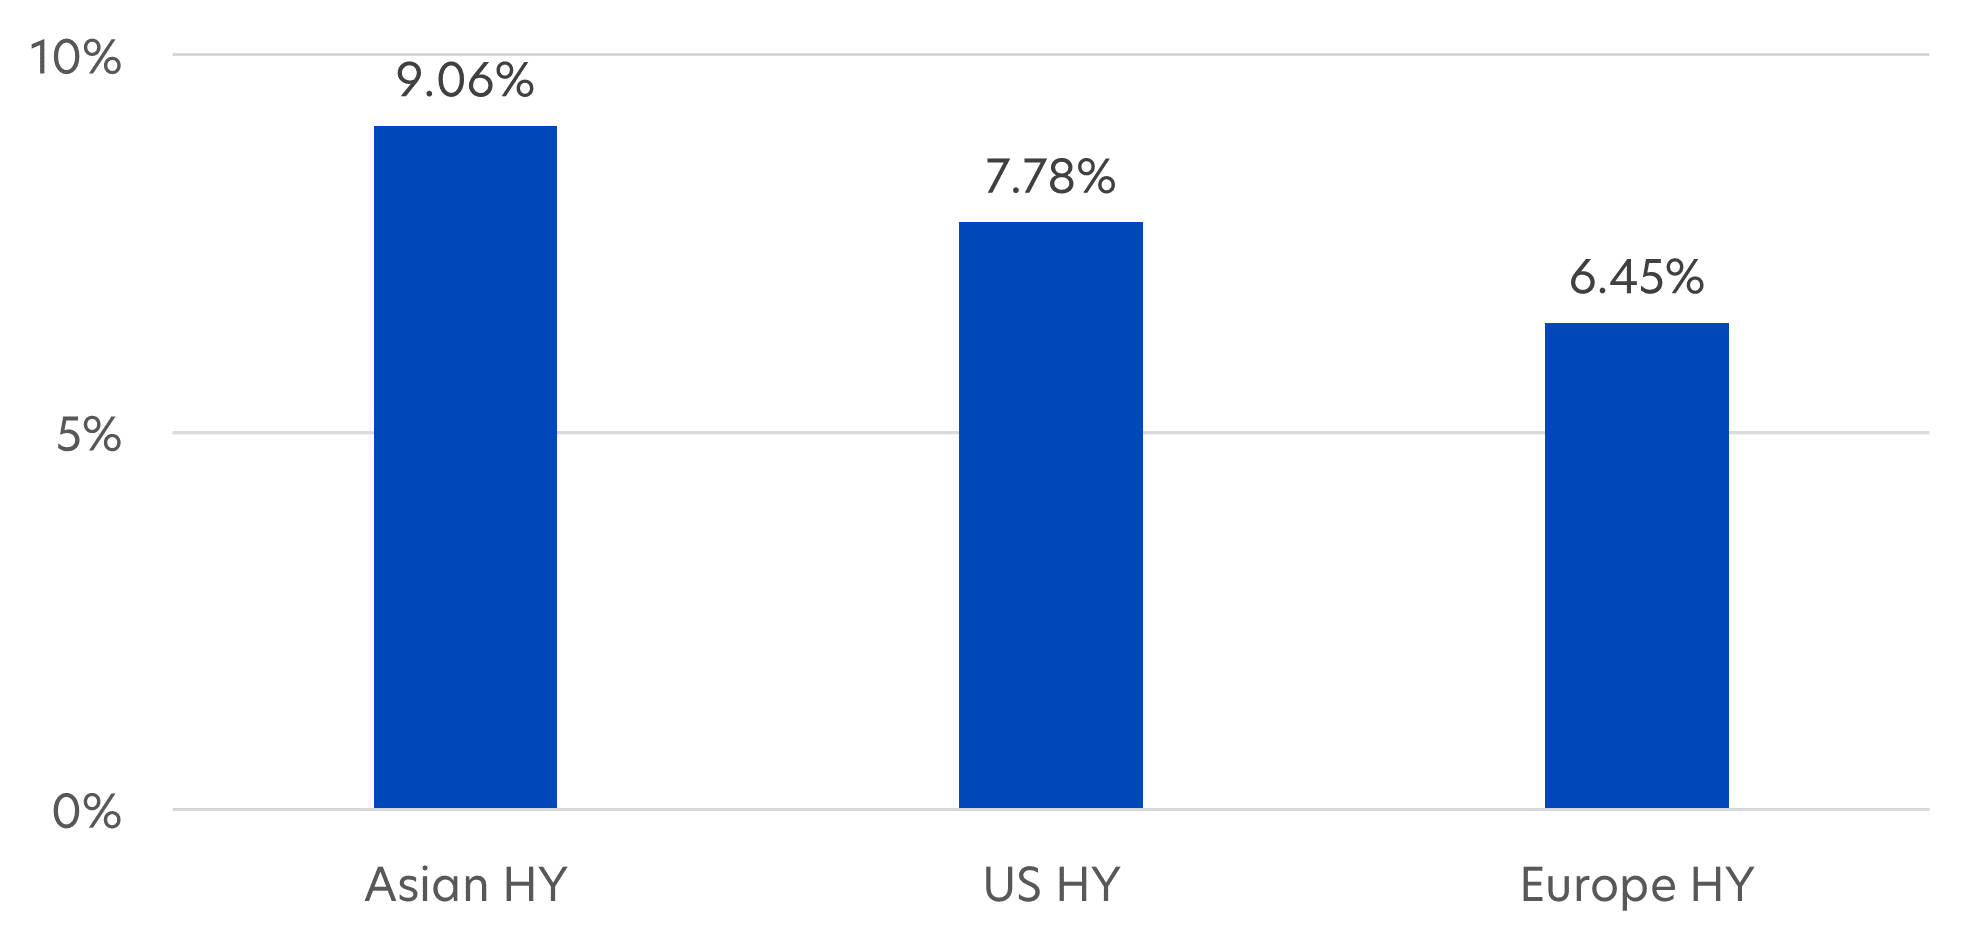 Fig 2: Weighted average yield to maturities of Asian, US and Europe HY bonds